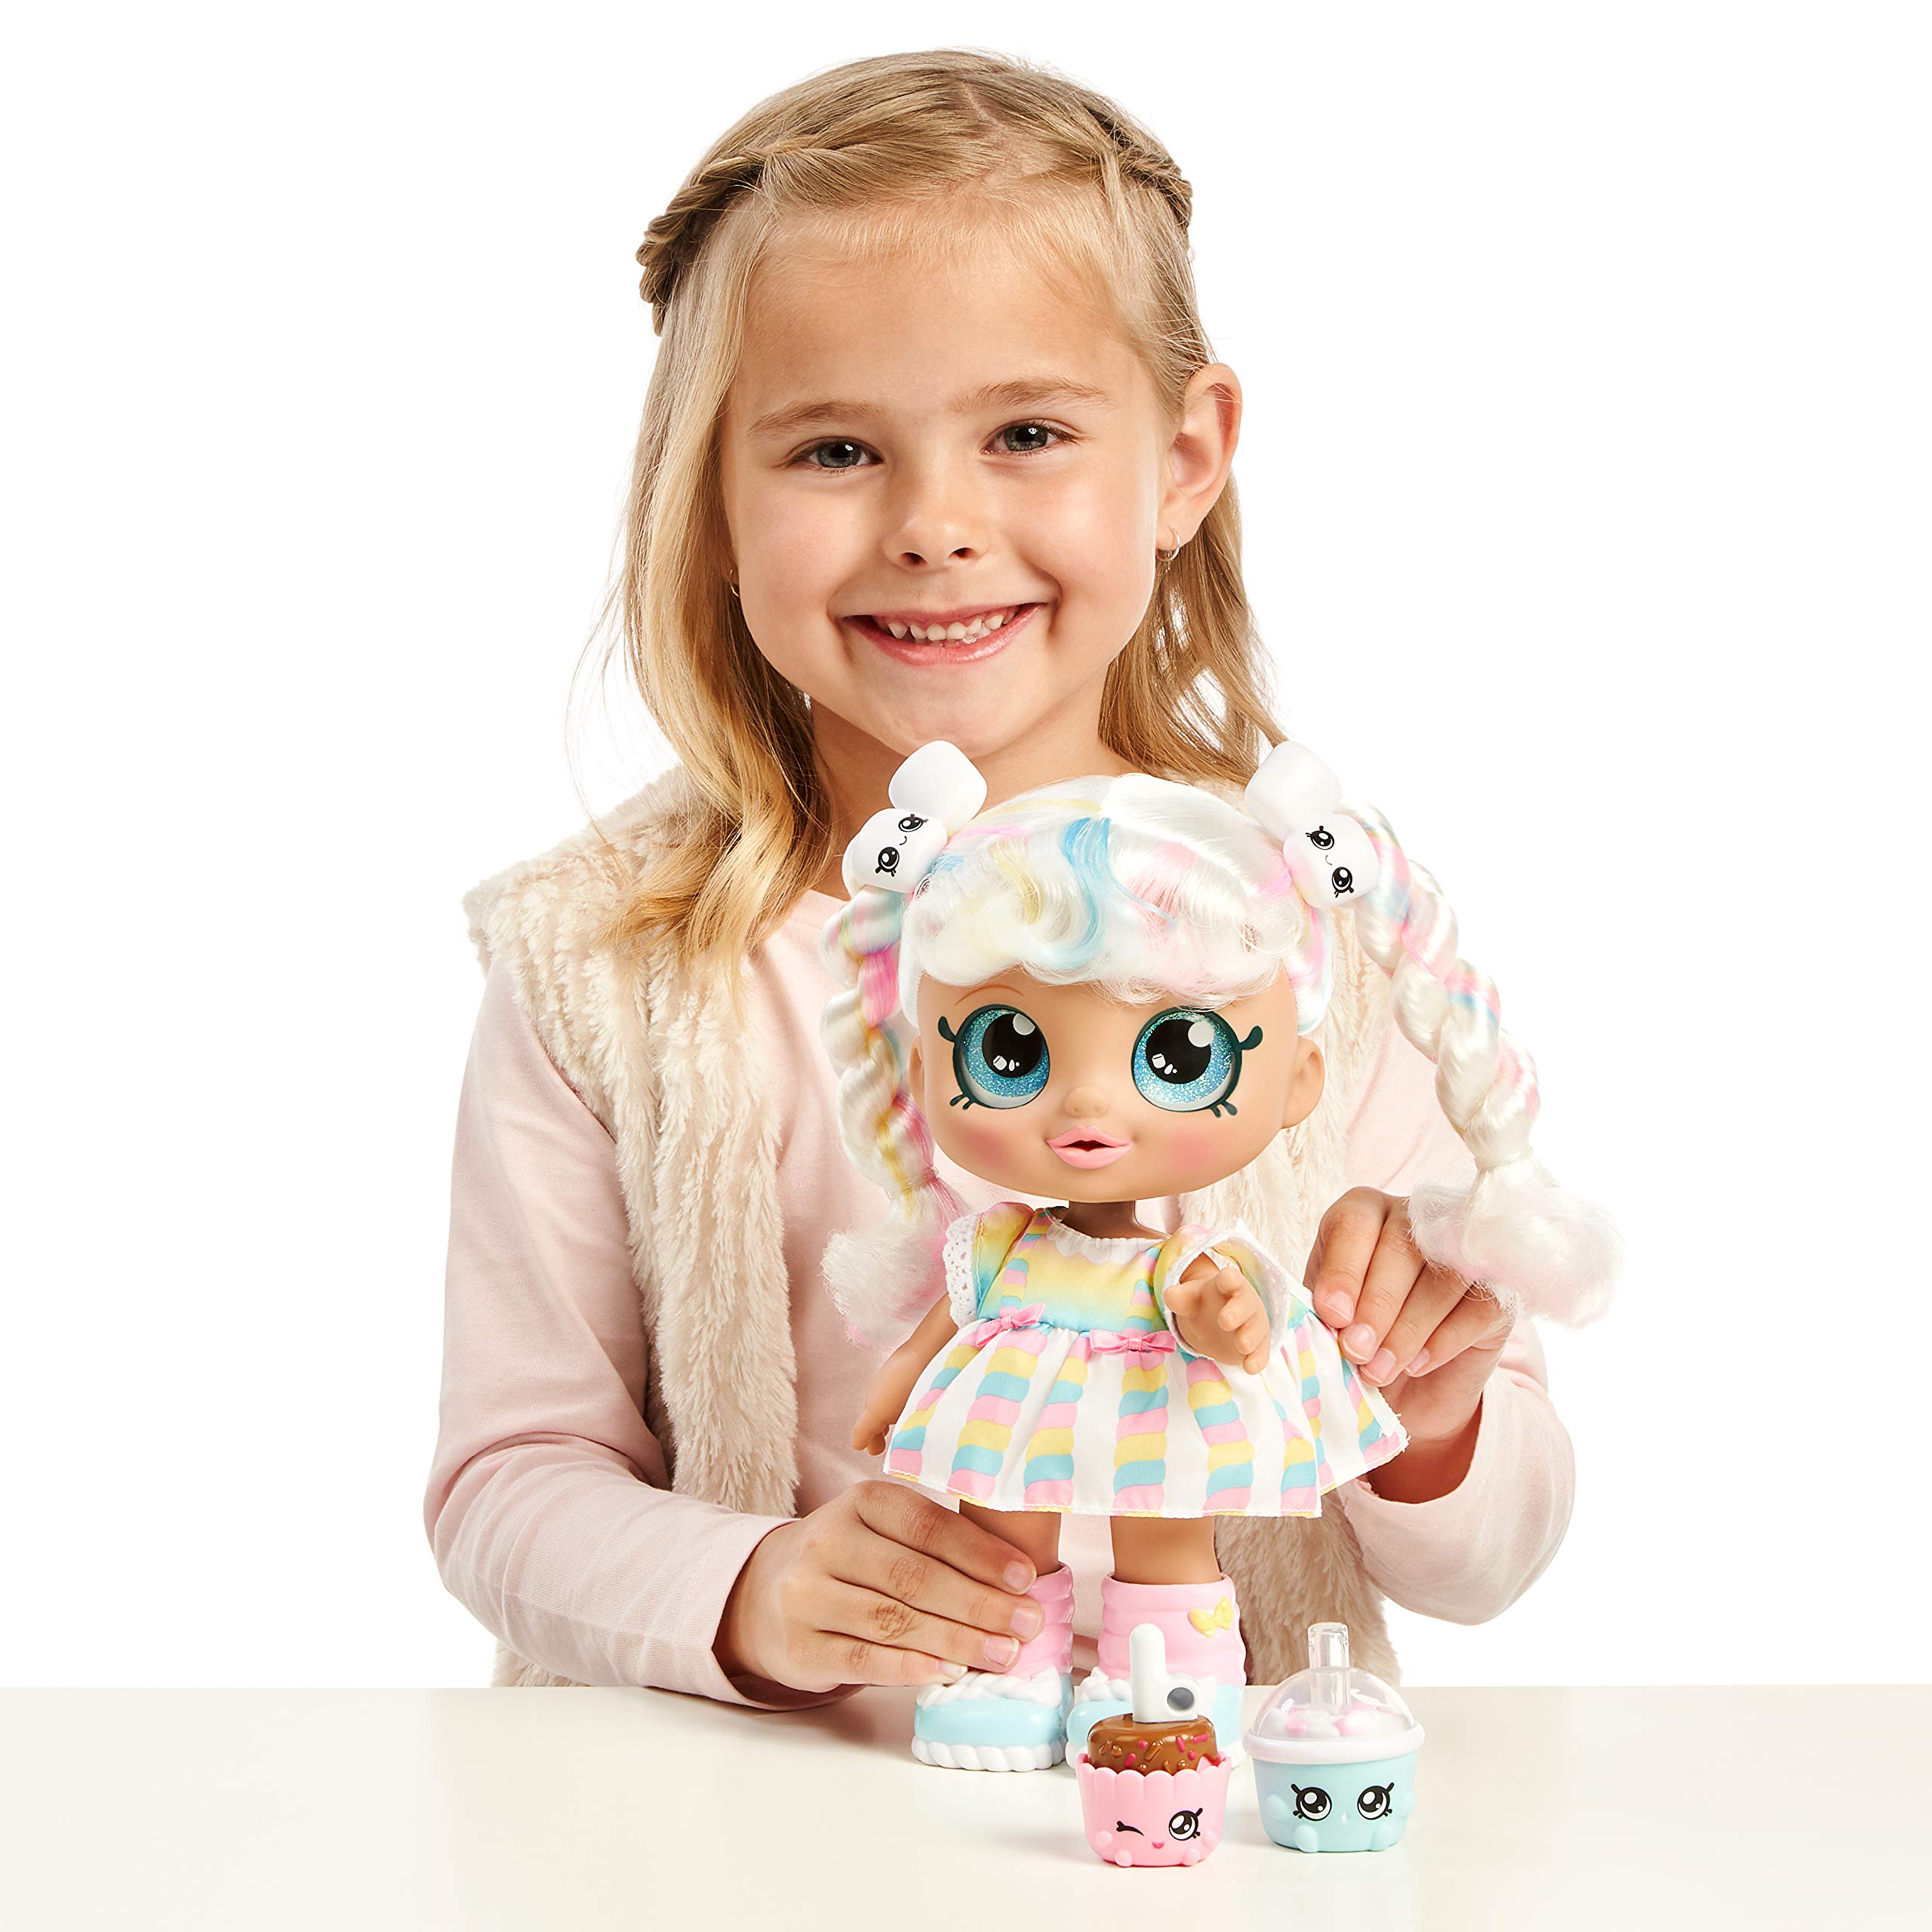 Kindi Kids Snack Time Friends - Pre-School Play Doll, Marsha Mello - for Ages 3+ | Changeable Clothes and Removable Shoes - Fun Play, for Imaginative Kids